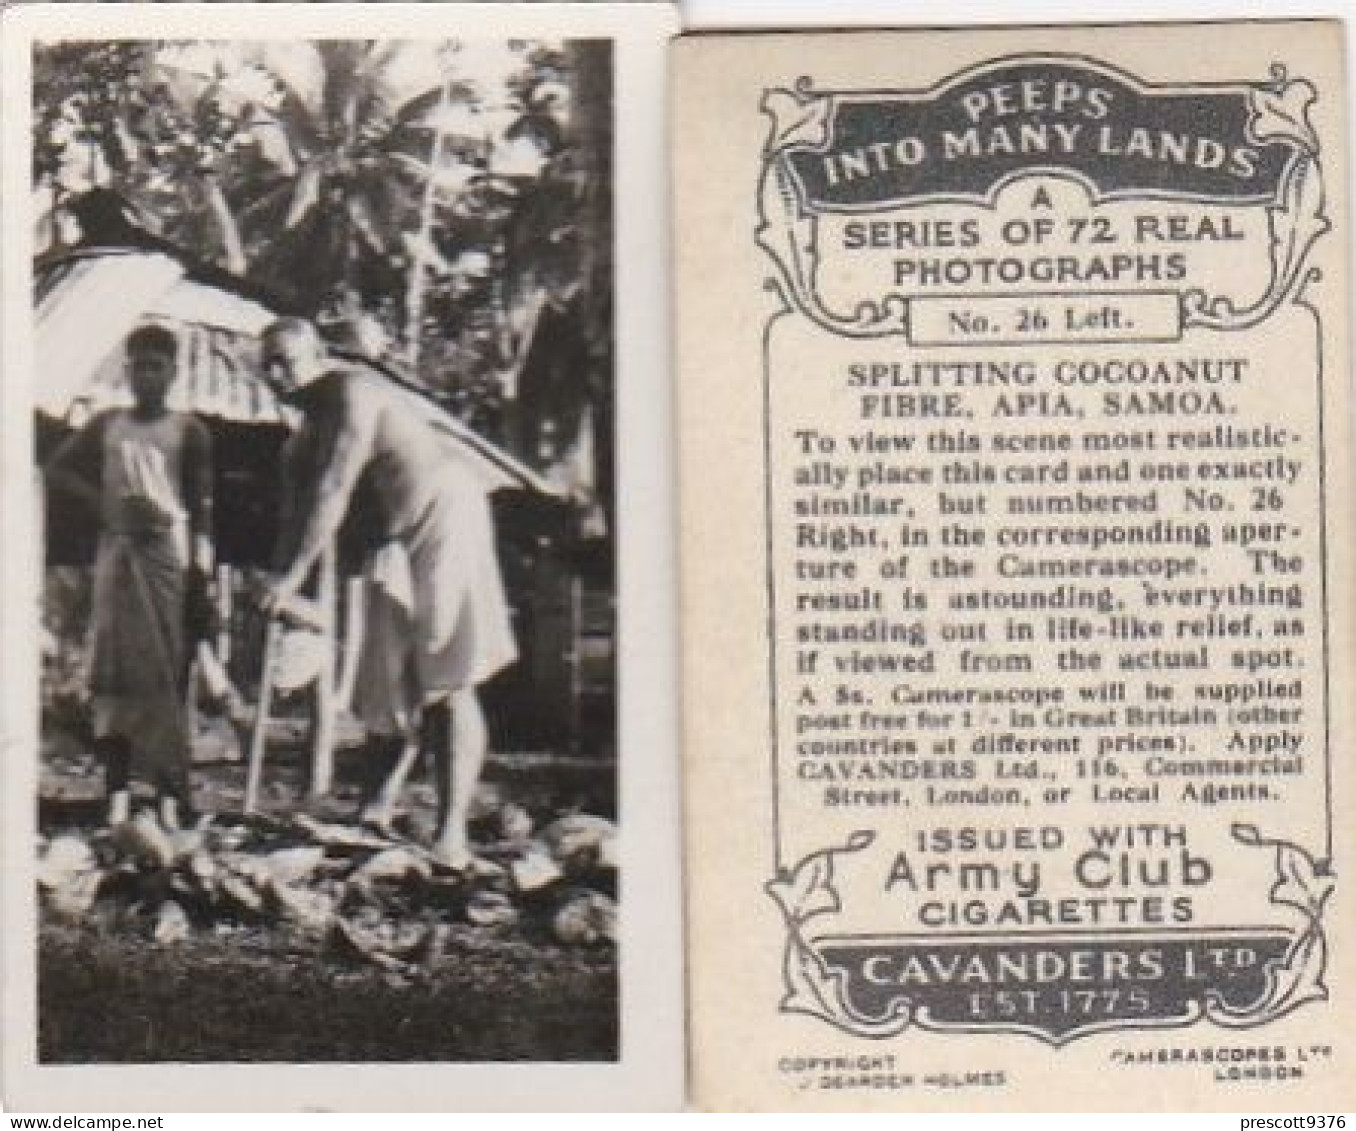 26 Splitting Coconut Fibre, Apia Samoa  - PEEPS INTO MANY LANDS A 1927 - Cavenders RP Stereoscope Cards 3x6cm - Stereoscopes - Side-by-side Viewers